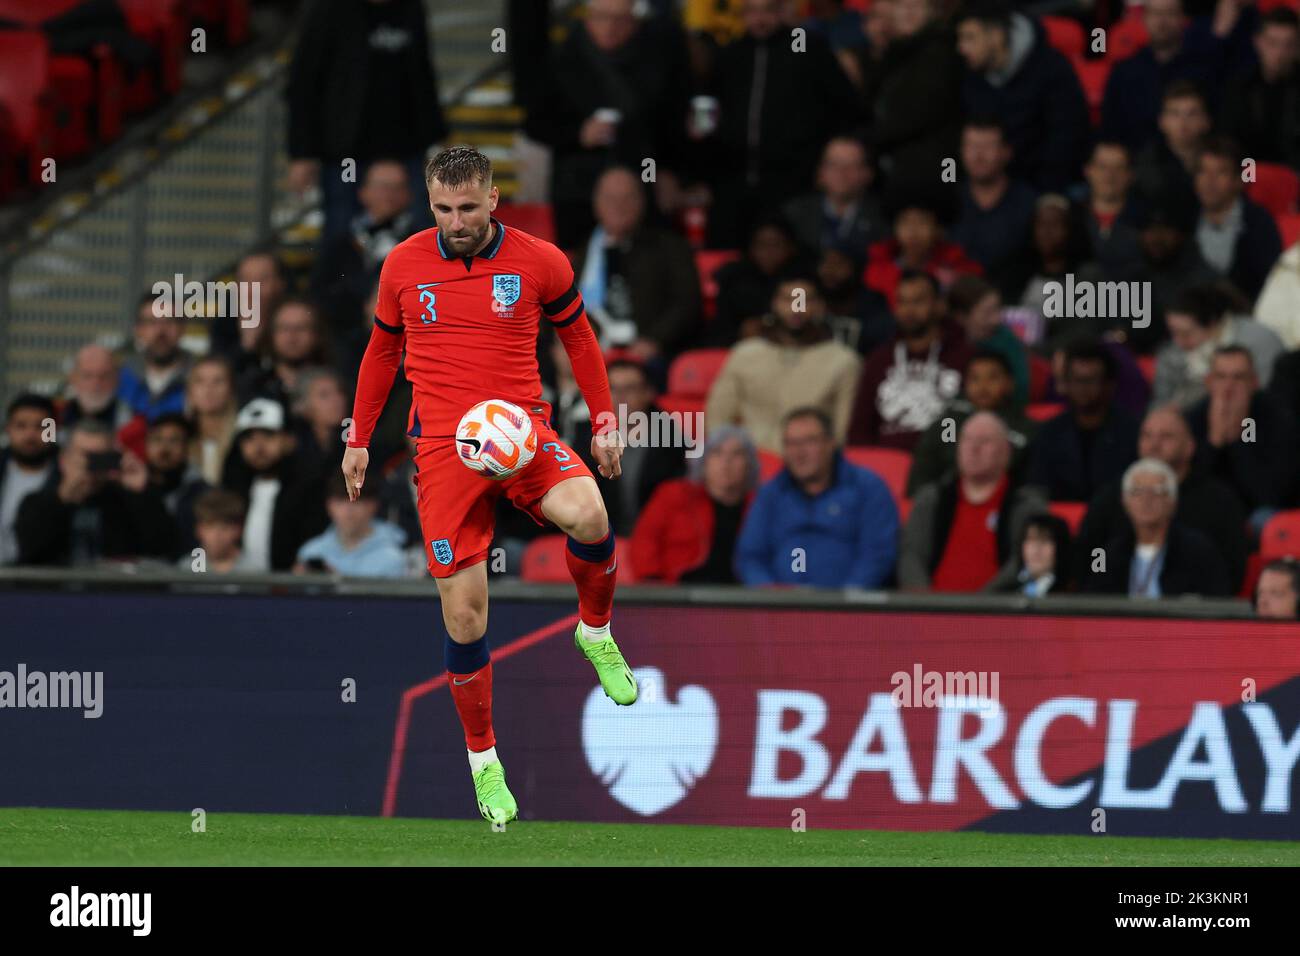 London, UK. 26th Sep, 2022. Luke Shaw of England in action. England v Germany, UEFA Nations league International group C match at Wembley Stadium in London on Monday 26th September 2022. Editorial use only. pic by Andrew Orchard/Andrew Orchard sports photography/Alamy Live News Credit: Andrew Orchard sports photography/Alamy Live News Stock Photo